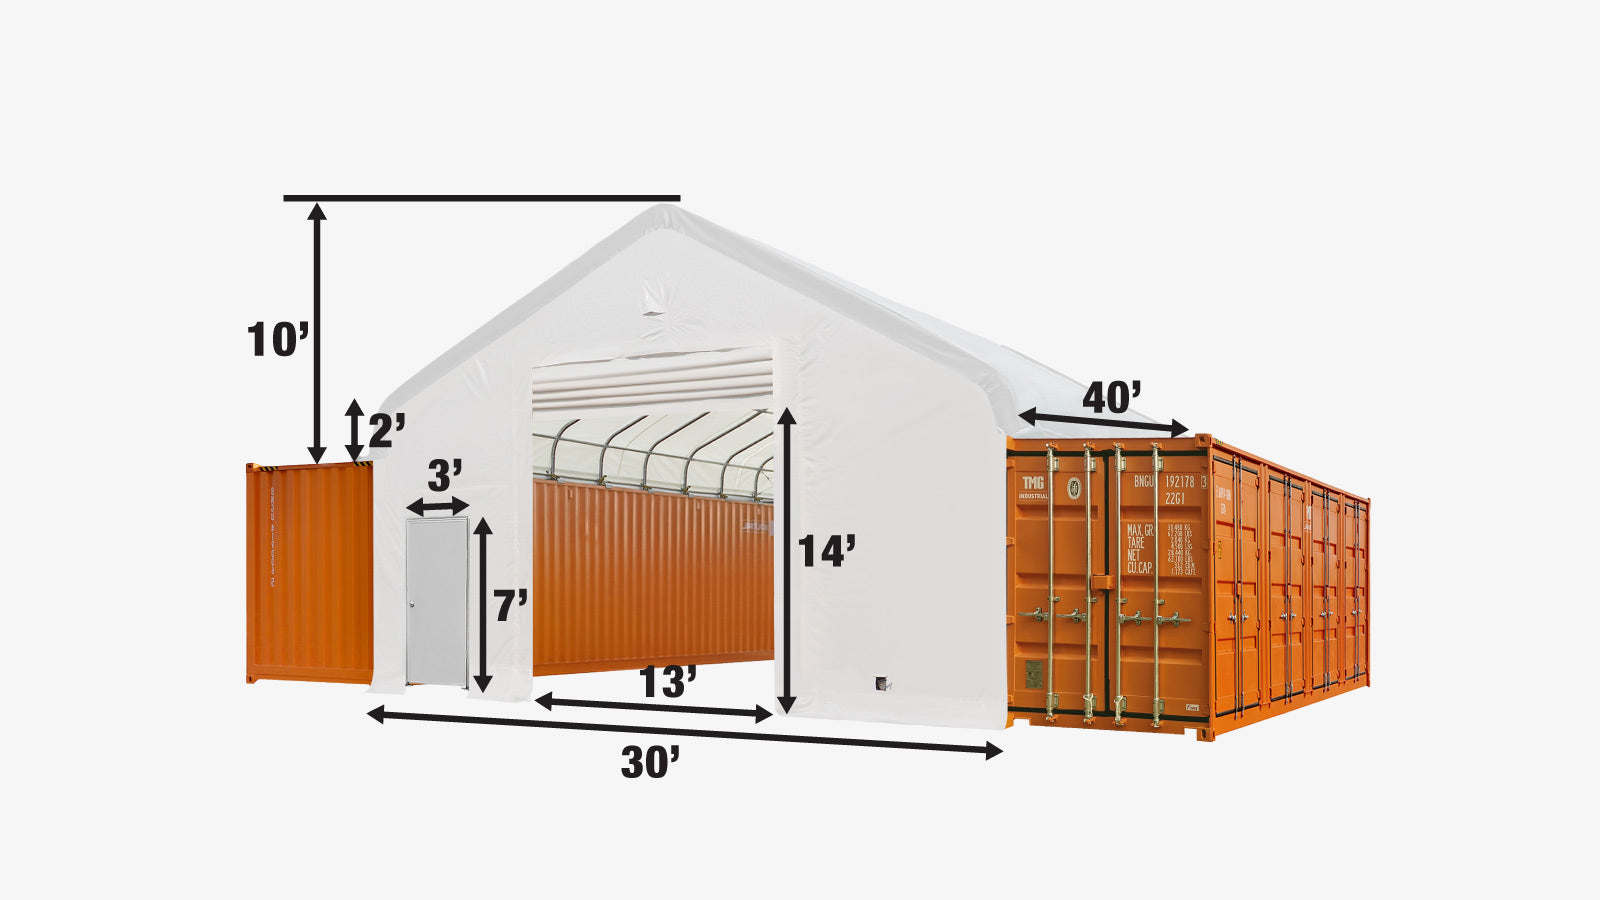 TMG Industrial 30' x 40' Container Peak Roof Shelter Pro Series with Heavy Duty 17 oz PVC Cover, Fully Enclosed front and back endwalls, TMG-ST3041CG-specifications-image